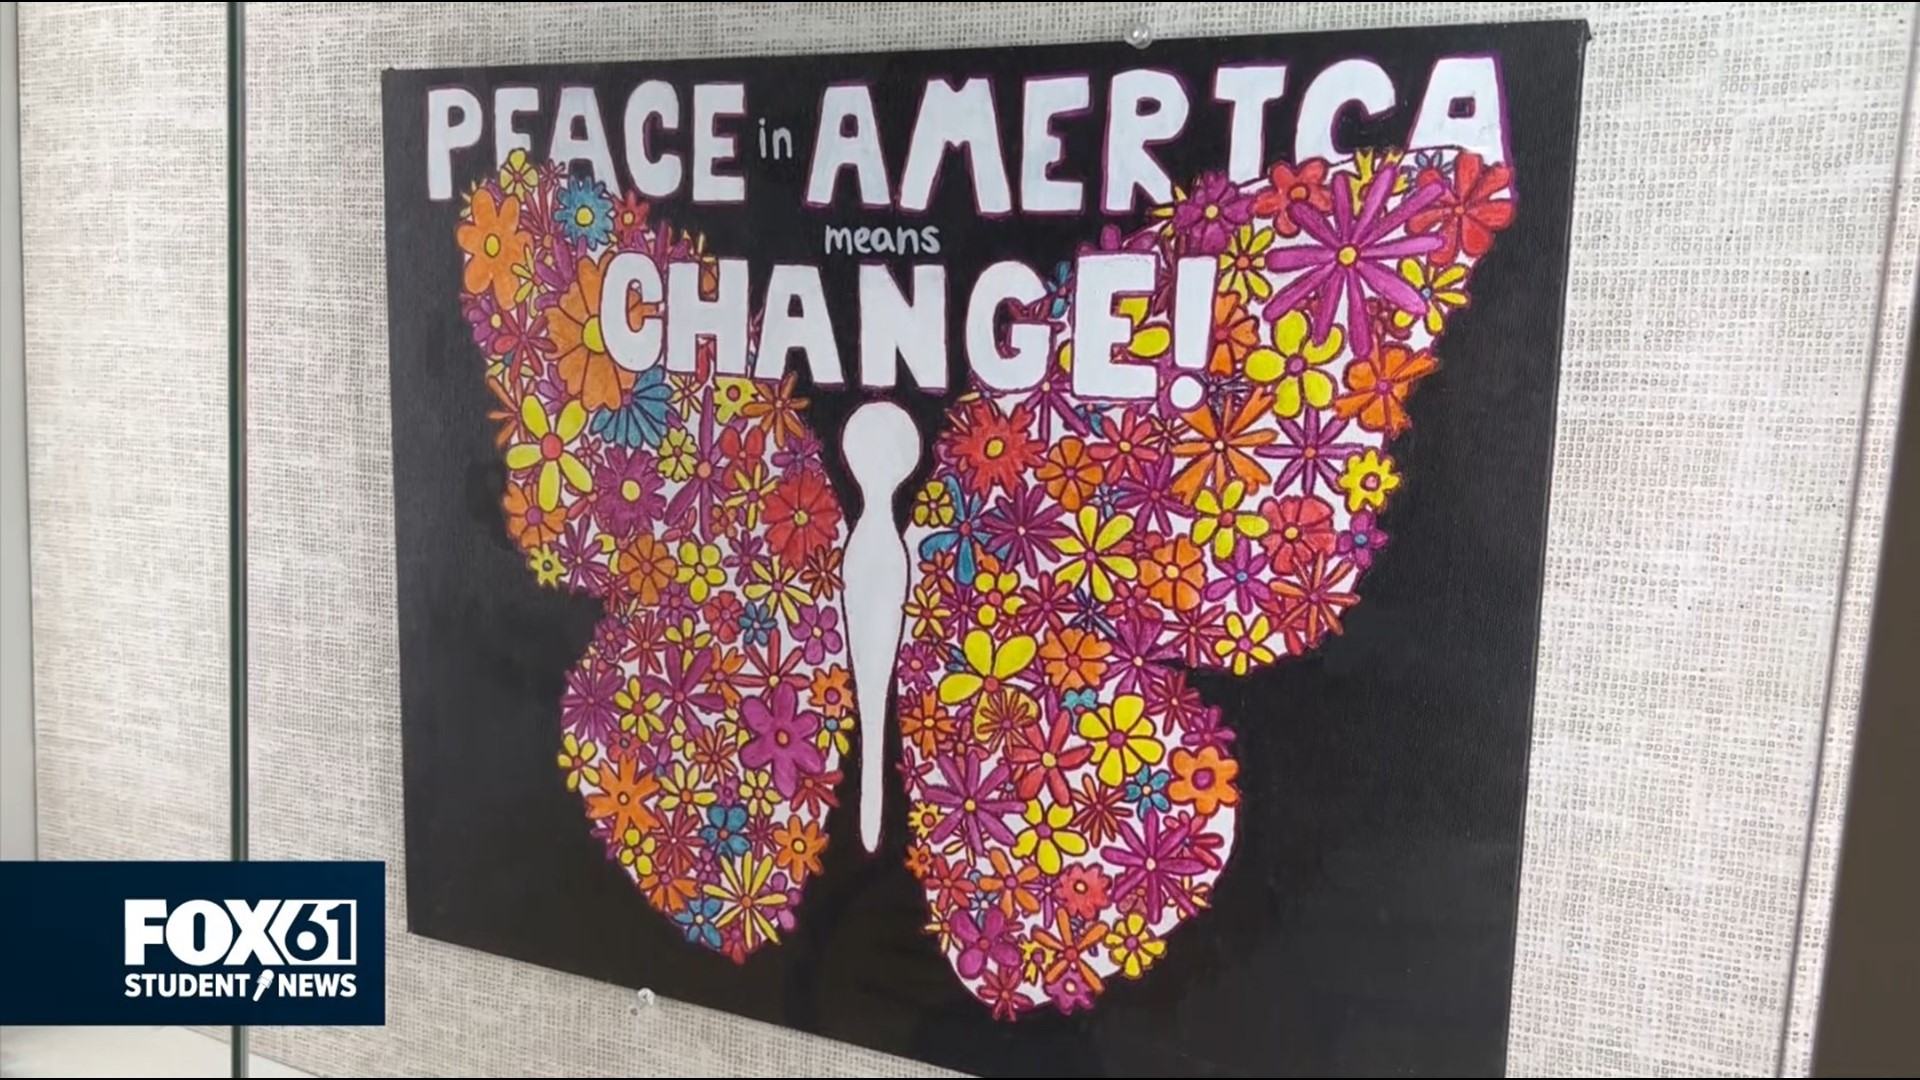 The students were given creative freedom to create any art piece that encompasses what peace in America means to them.